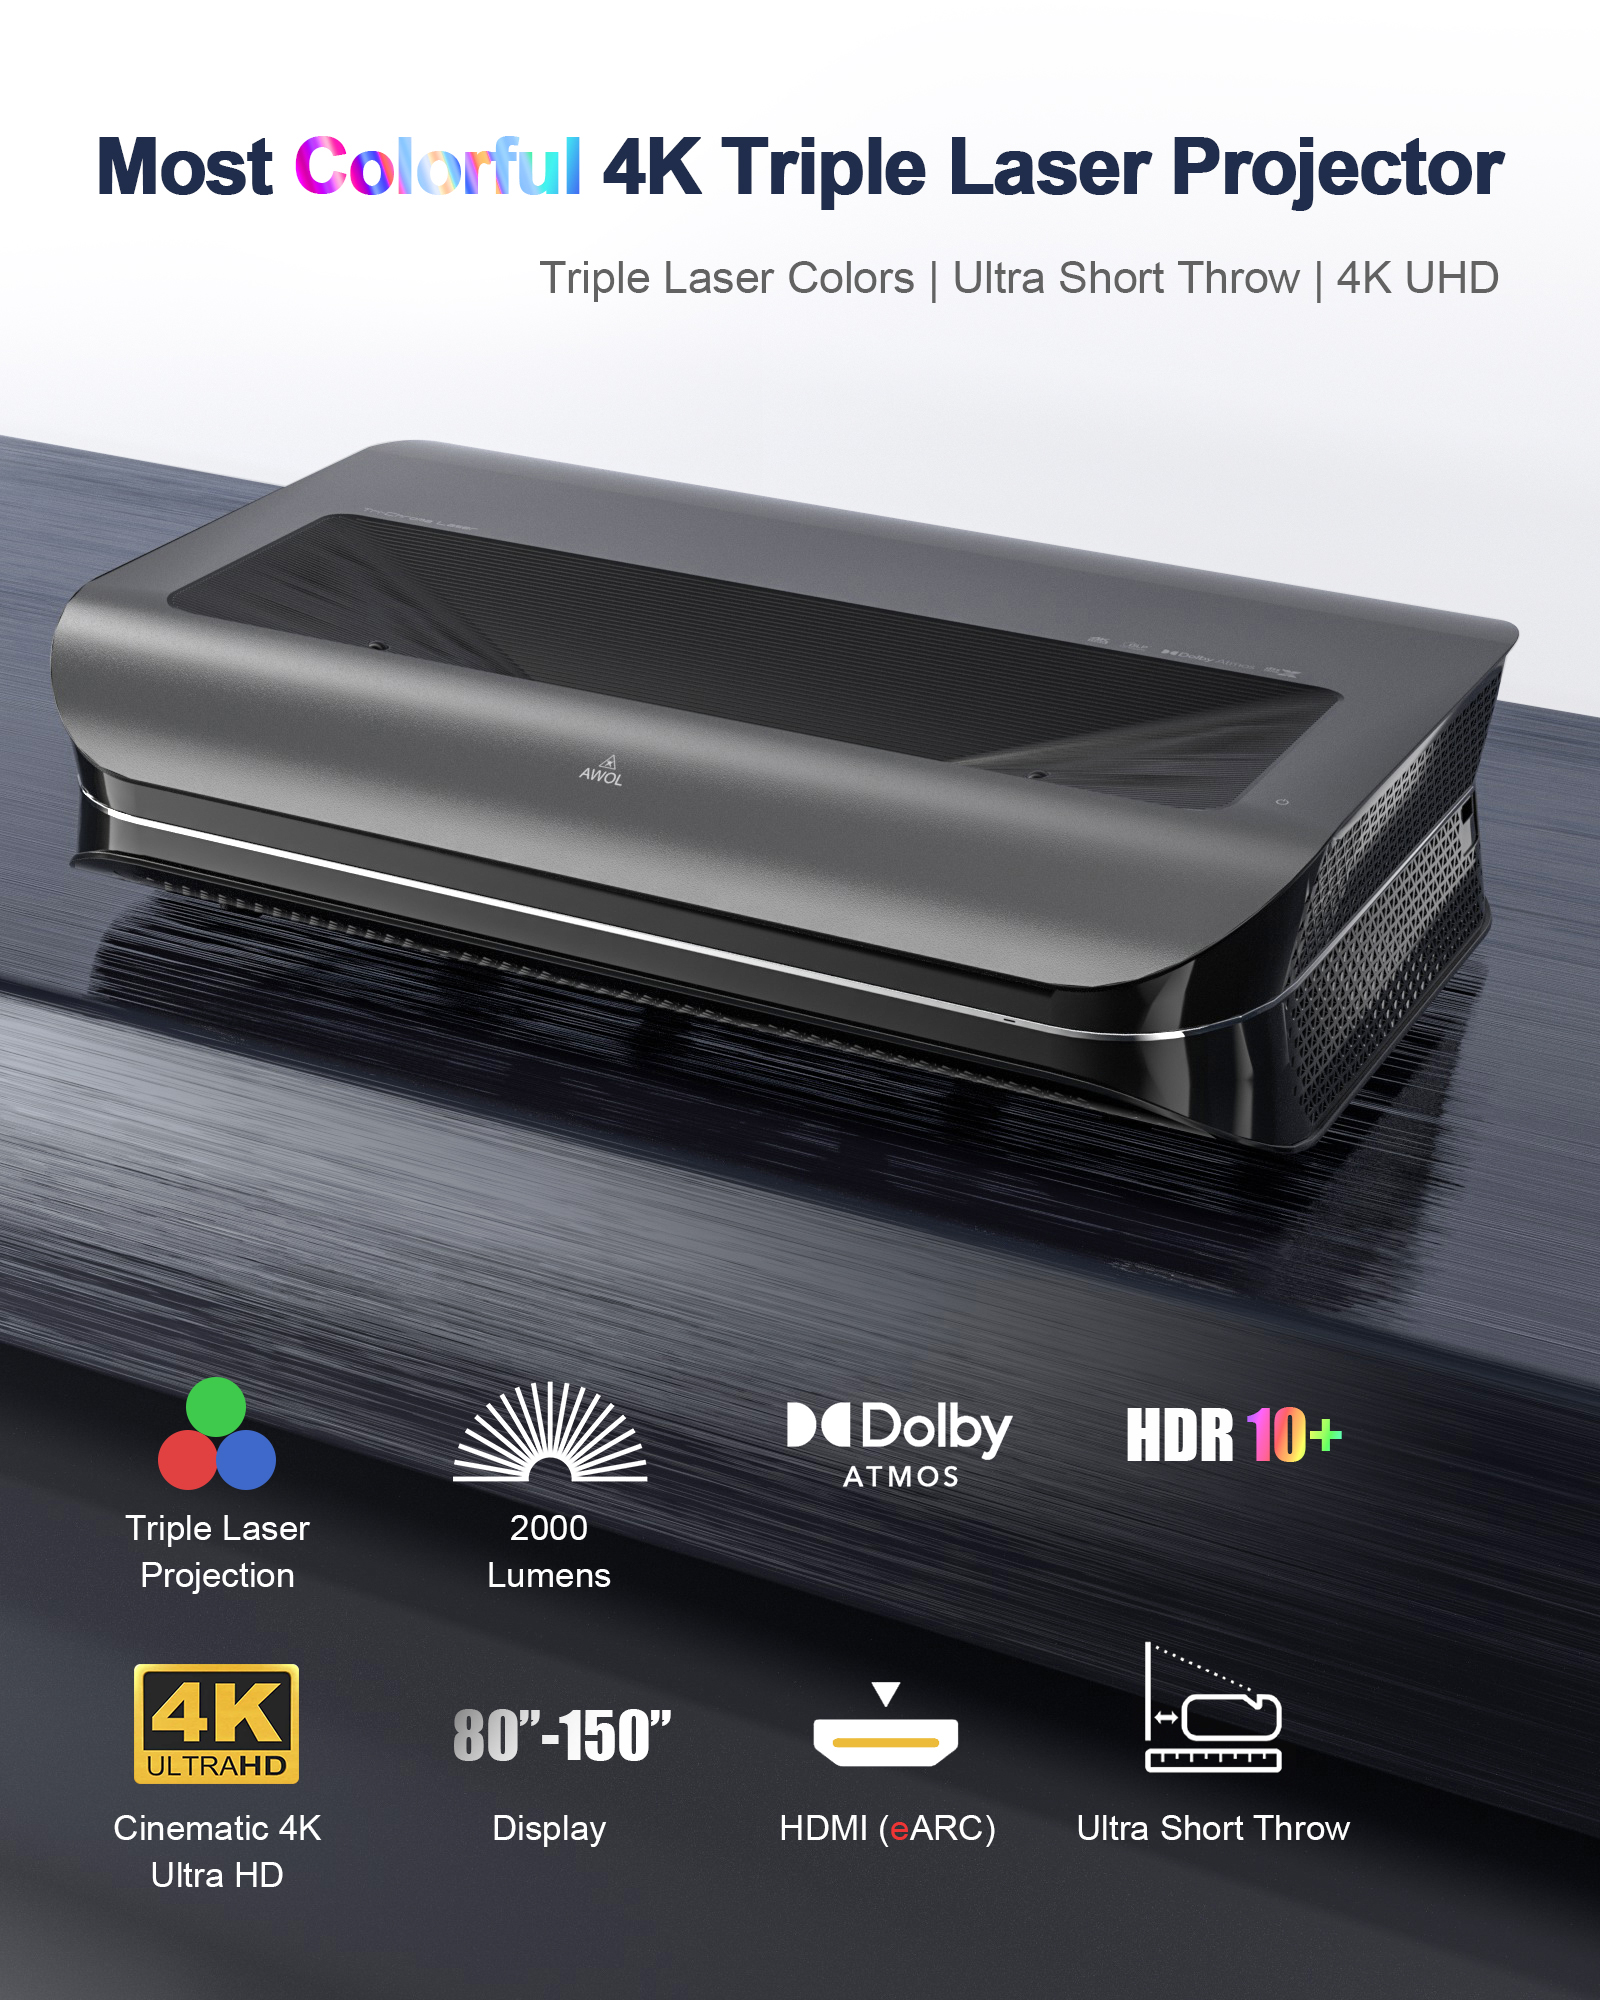 AWOL 4K 3D TRIPLE LASER PROJECTOR LTV-2500 Ultra Short Throw UHD DMD 150-Inch Screen Dolby Atmos 2000ANSI Lux HDR10+ Include Amazon Fire TV Stick 4K MAX Android 9.0 OS Home Cinema